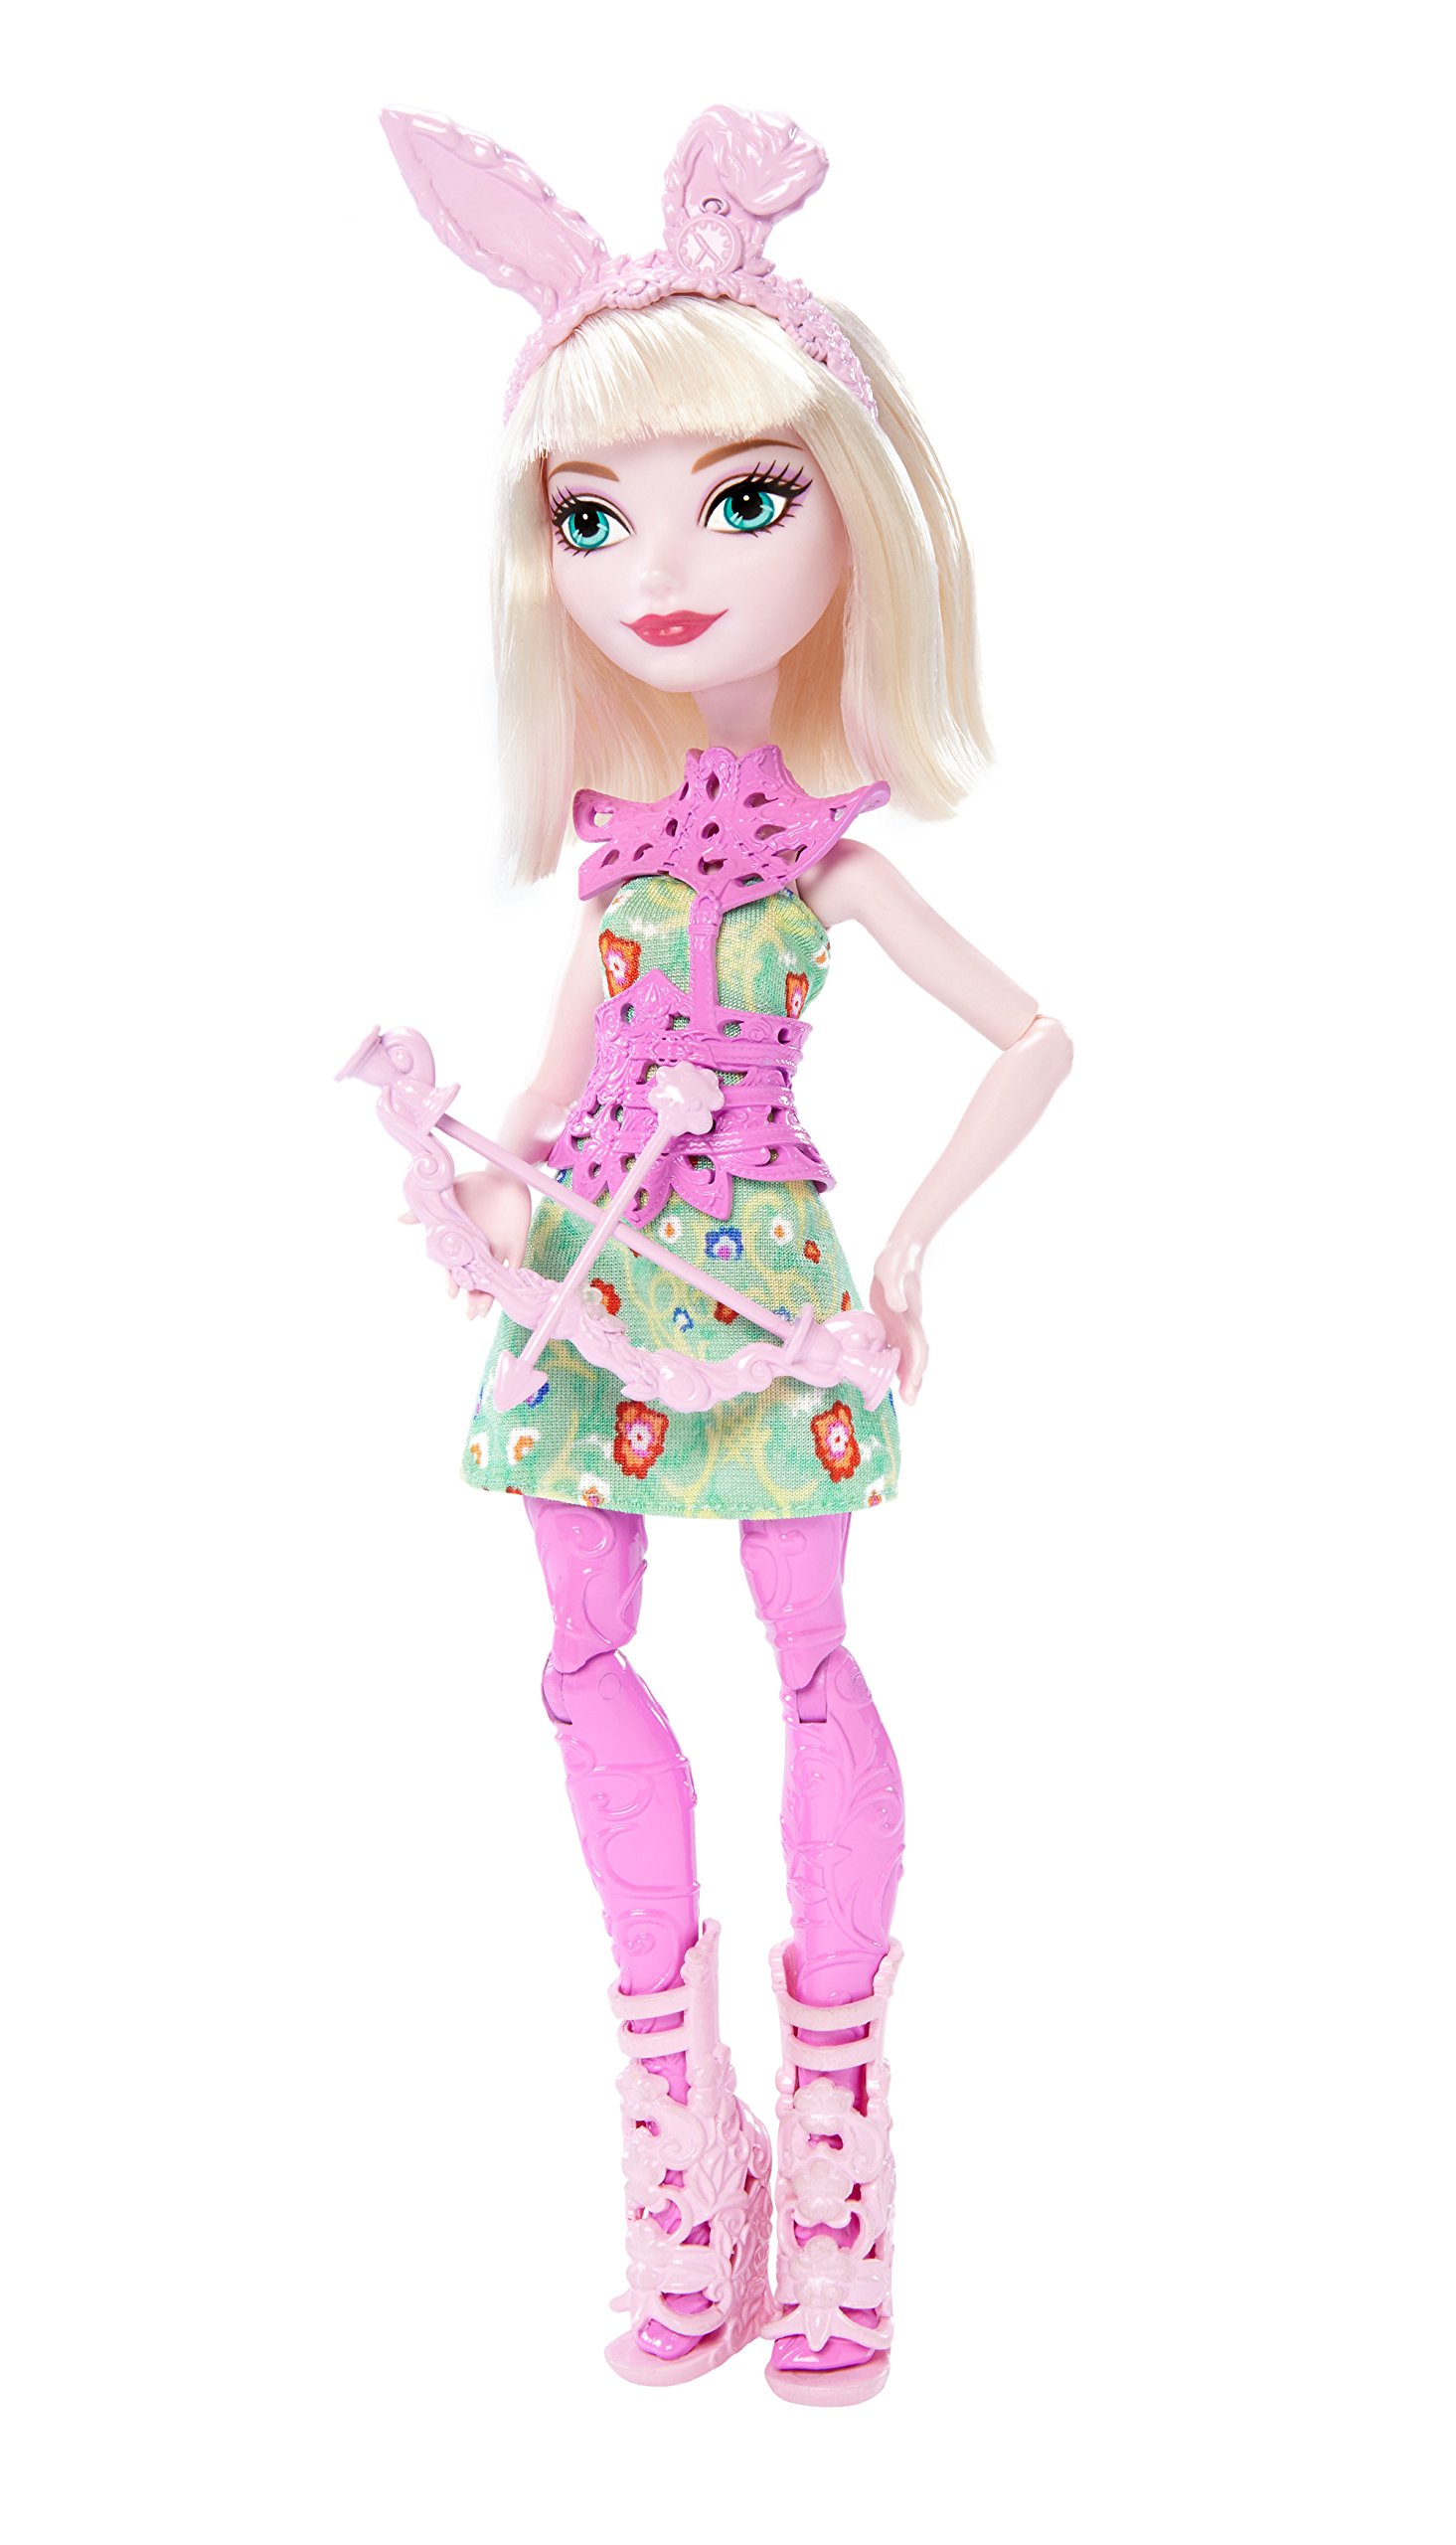 Mattel Ever After High Archery Bunny Doll